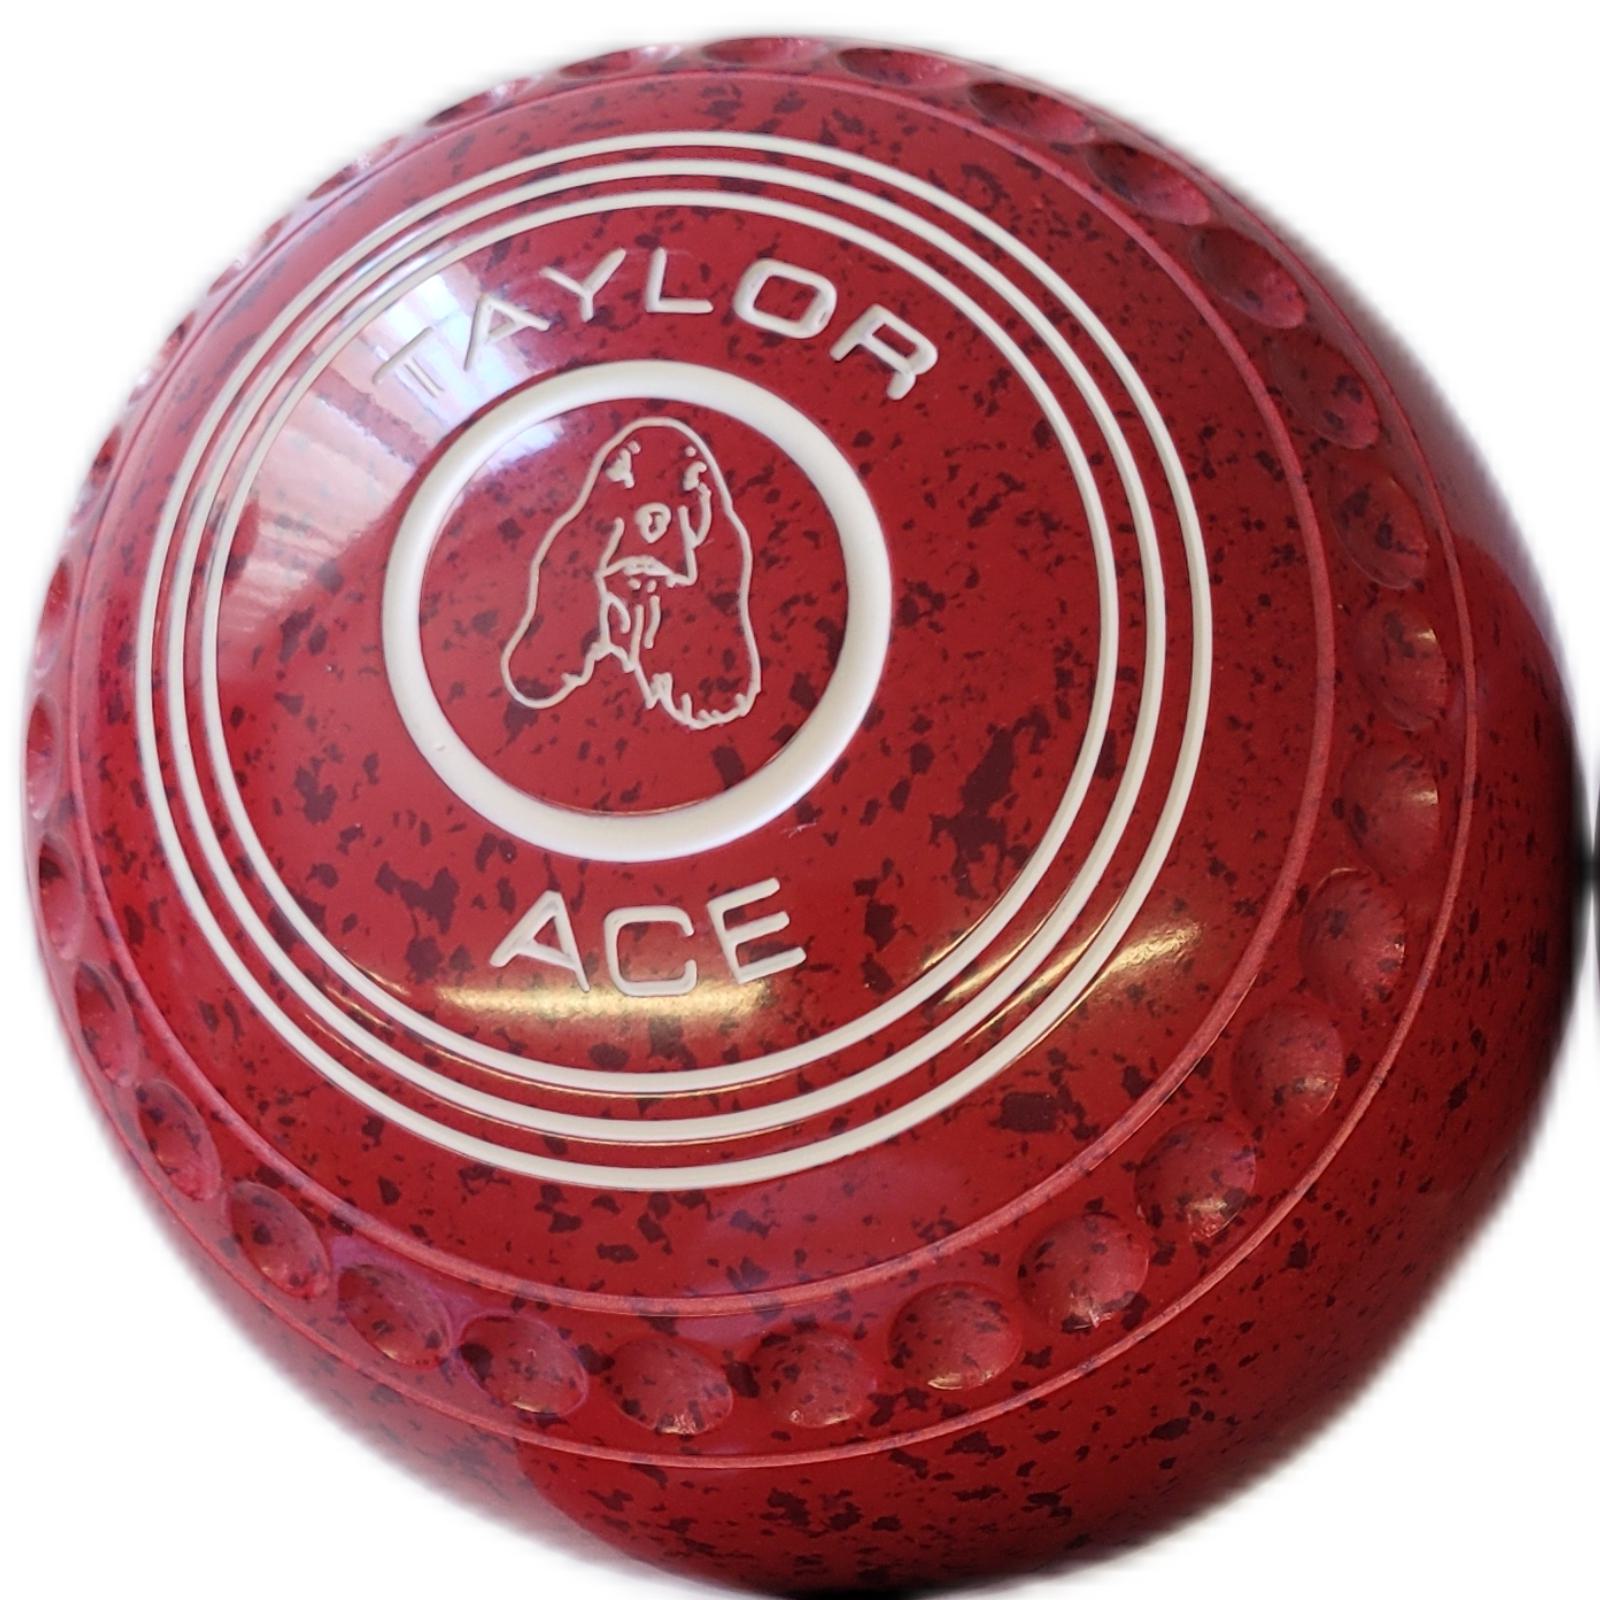 Taylor Ace Size 3H  Cherry Red Pro grip